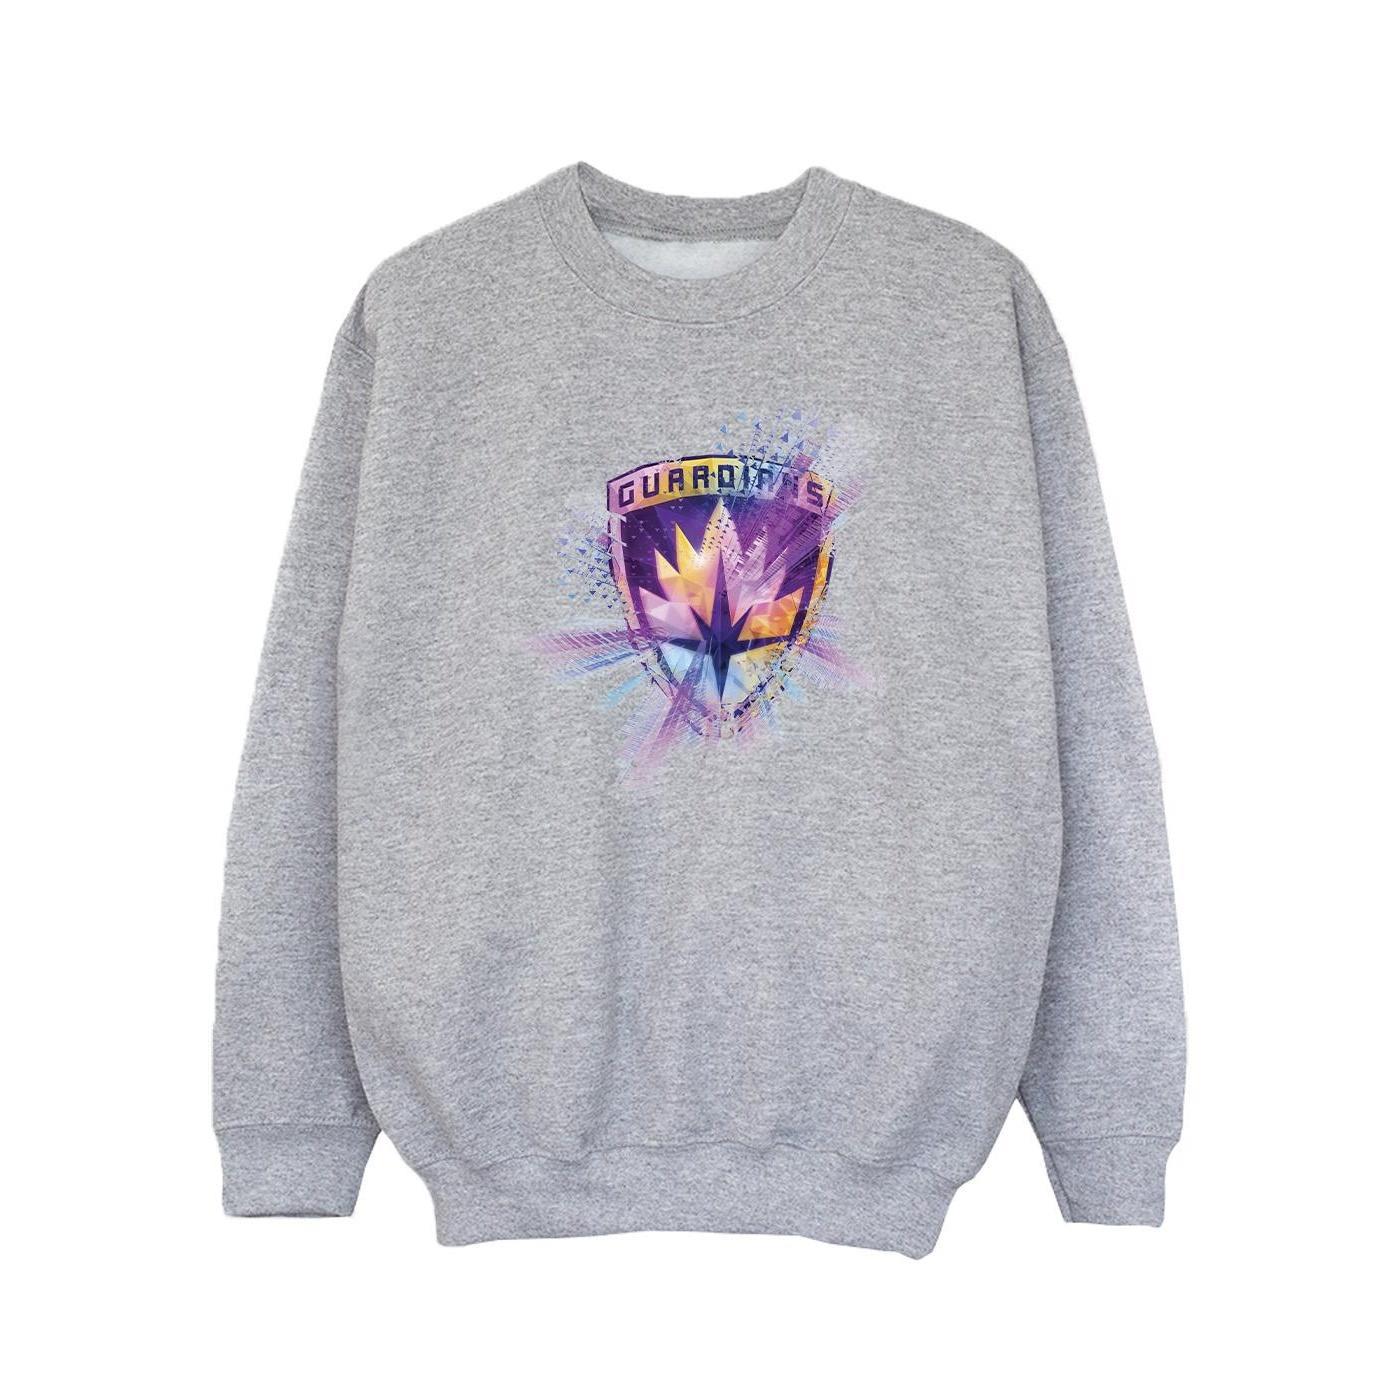 Marvel Girls Guardians Of The Galaxy Abstract Star Lord Sweatshirt (Sports Grey) (7-8 Years)